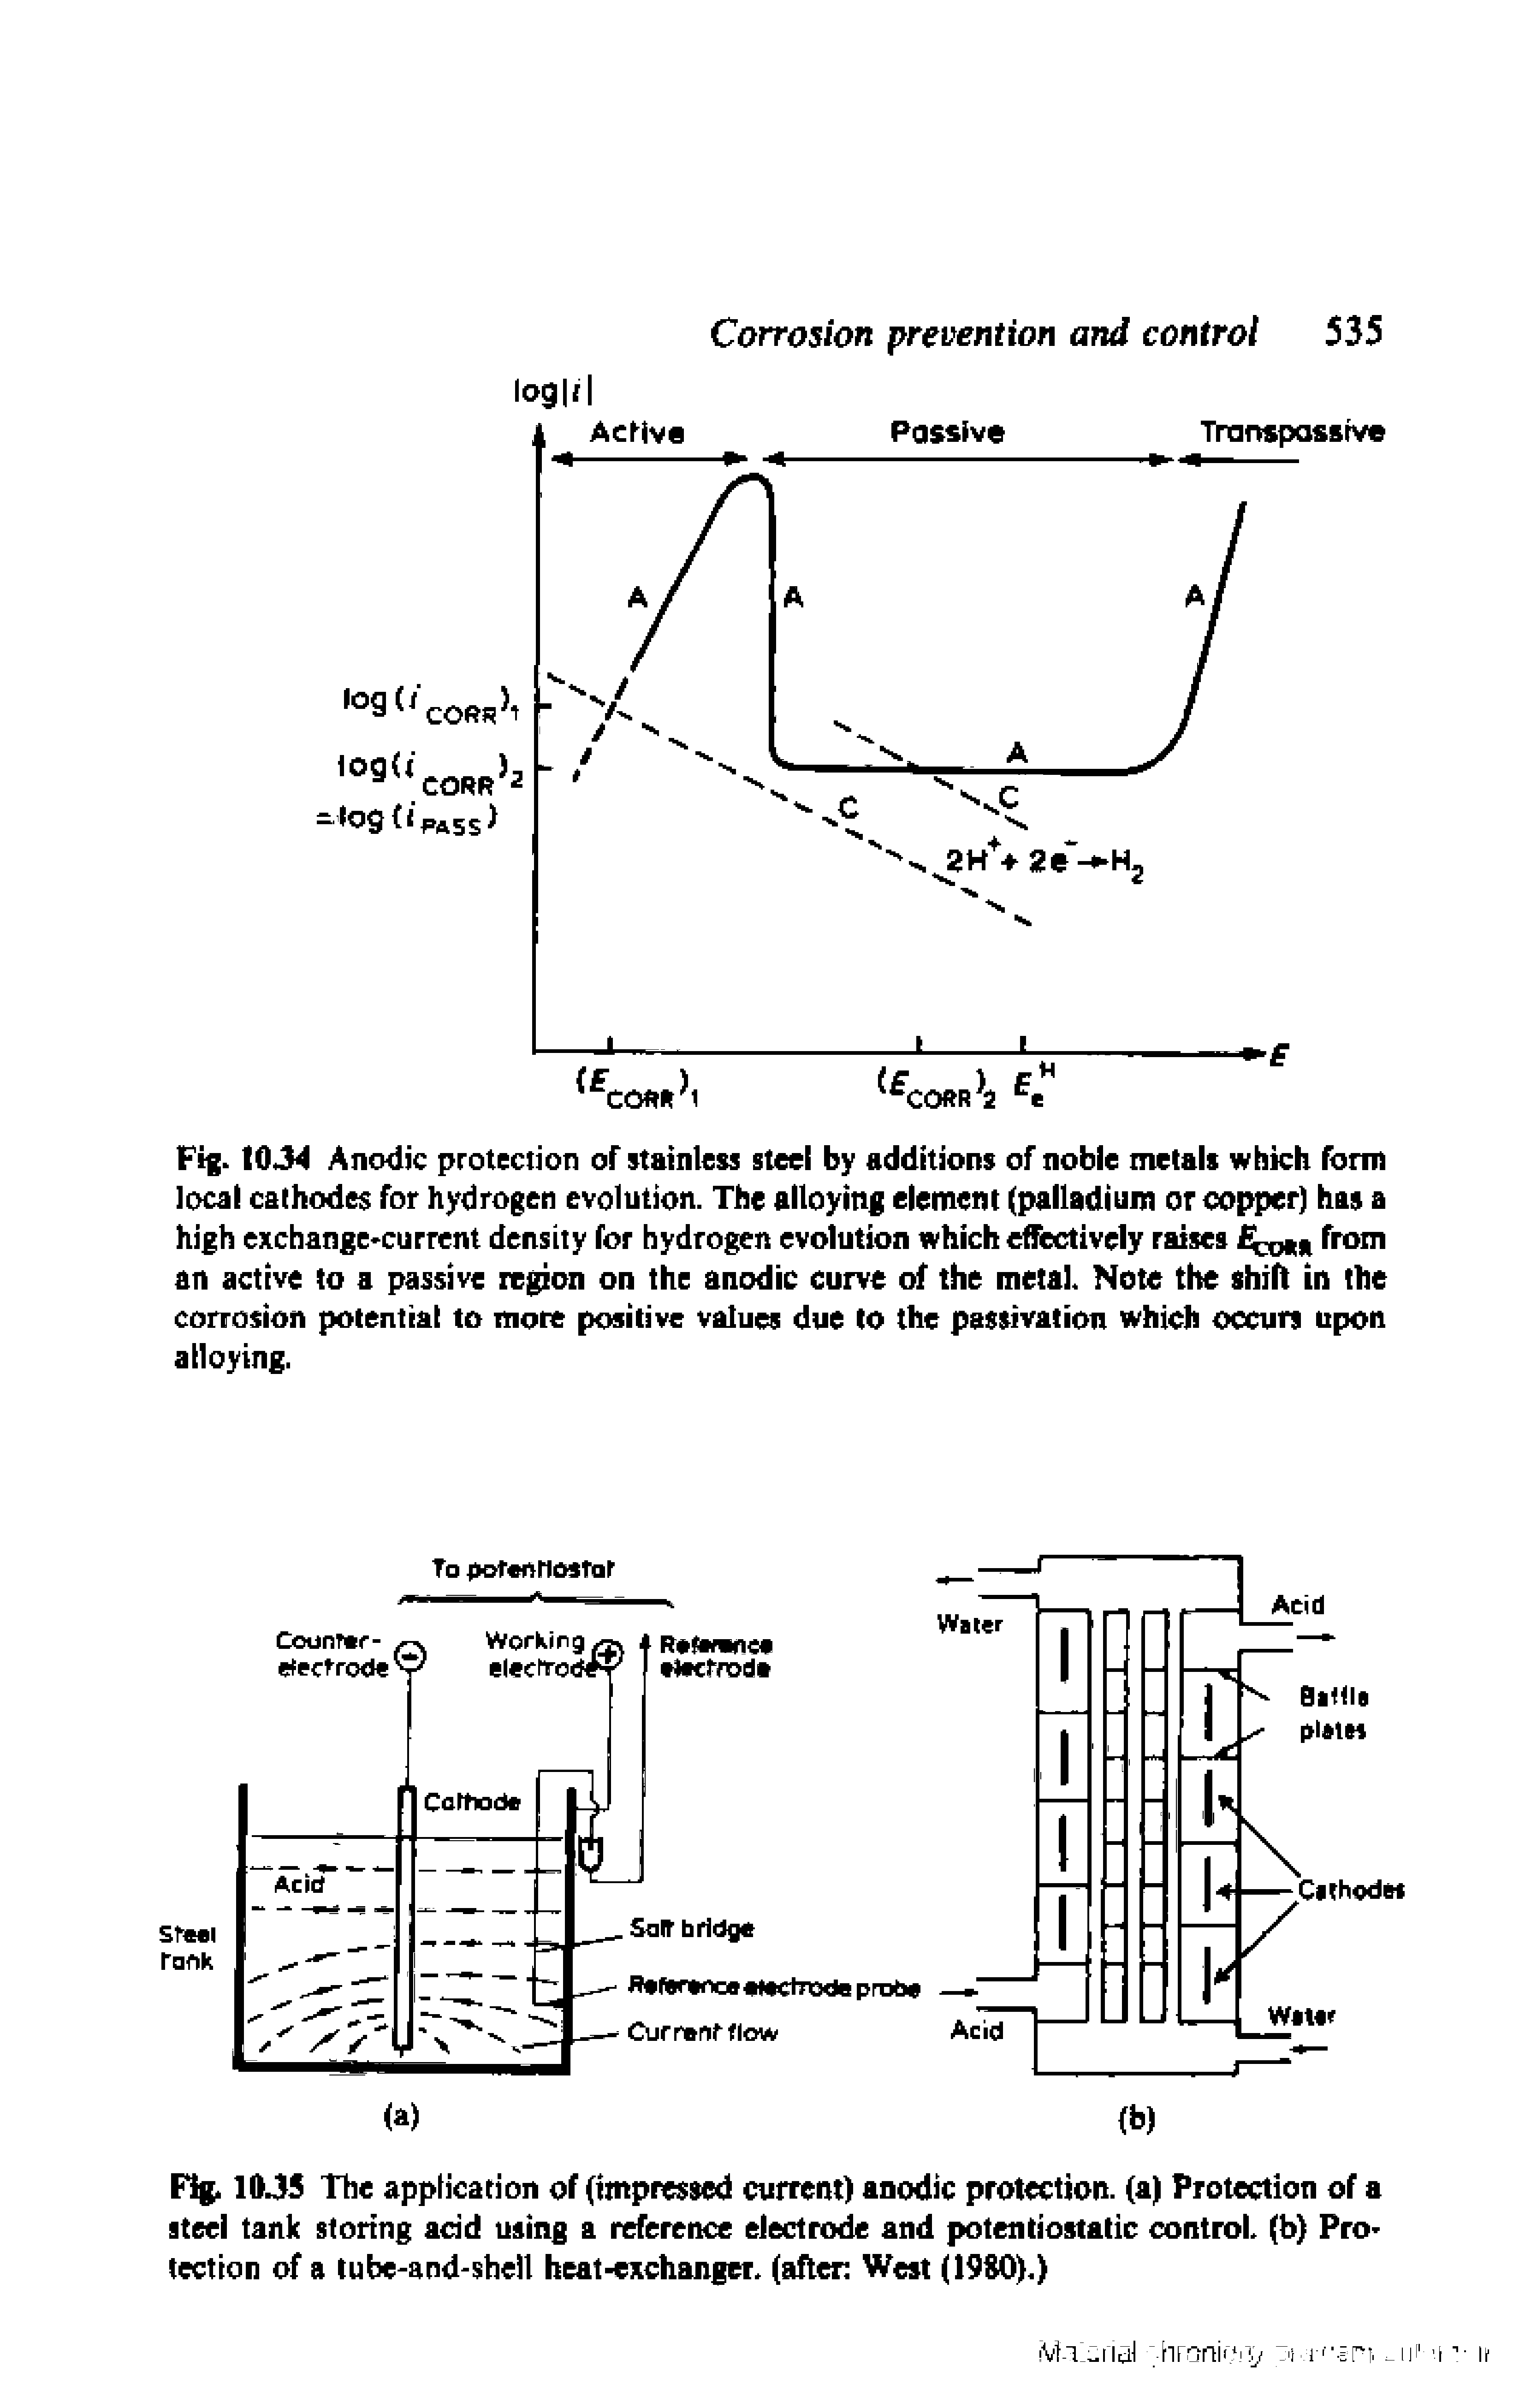 Fig. 1DJ5 The application of (impressed current) anodic protection, (a) Protection of a steel tank storing add using a reference electrode and potentiosiatic control (b) Pro tection of a tube-and-shell heat-exchanger, (after West (1980).)...